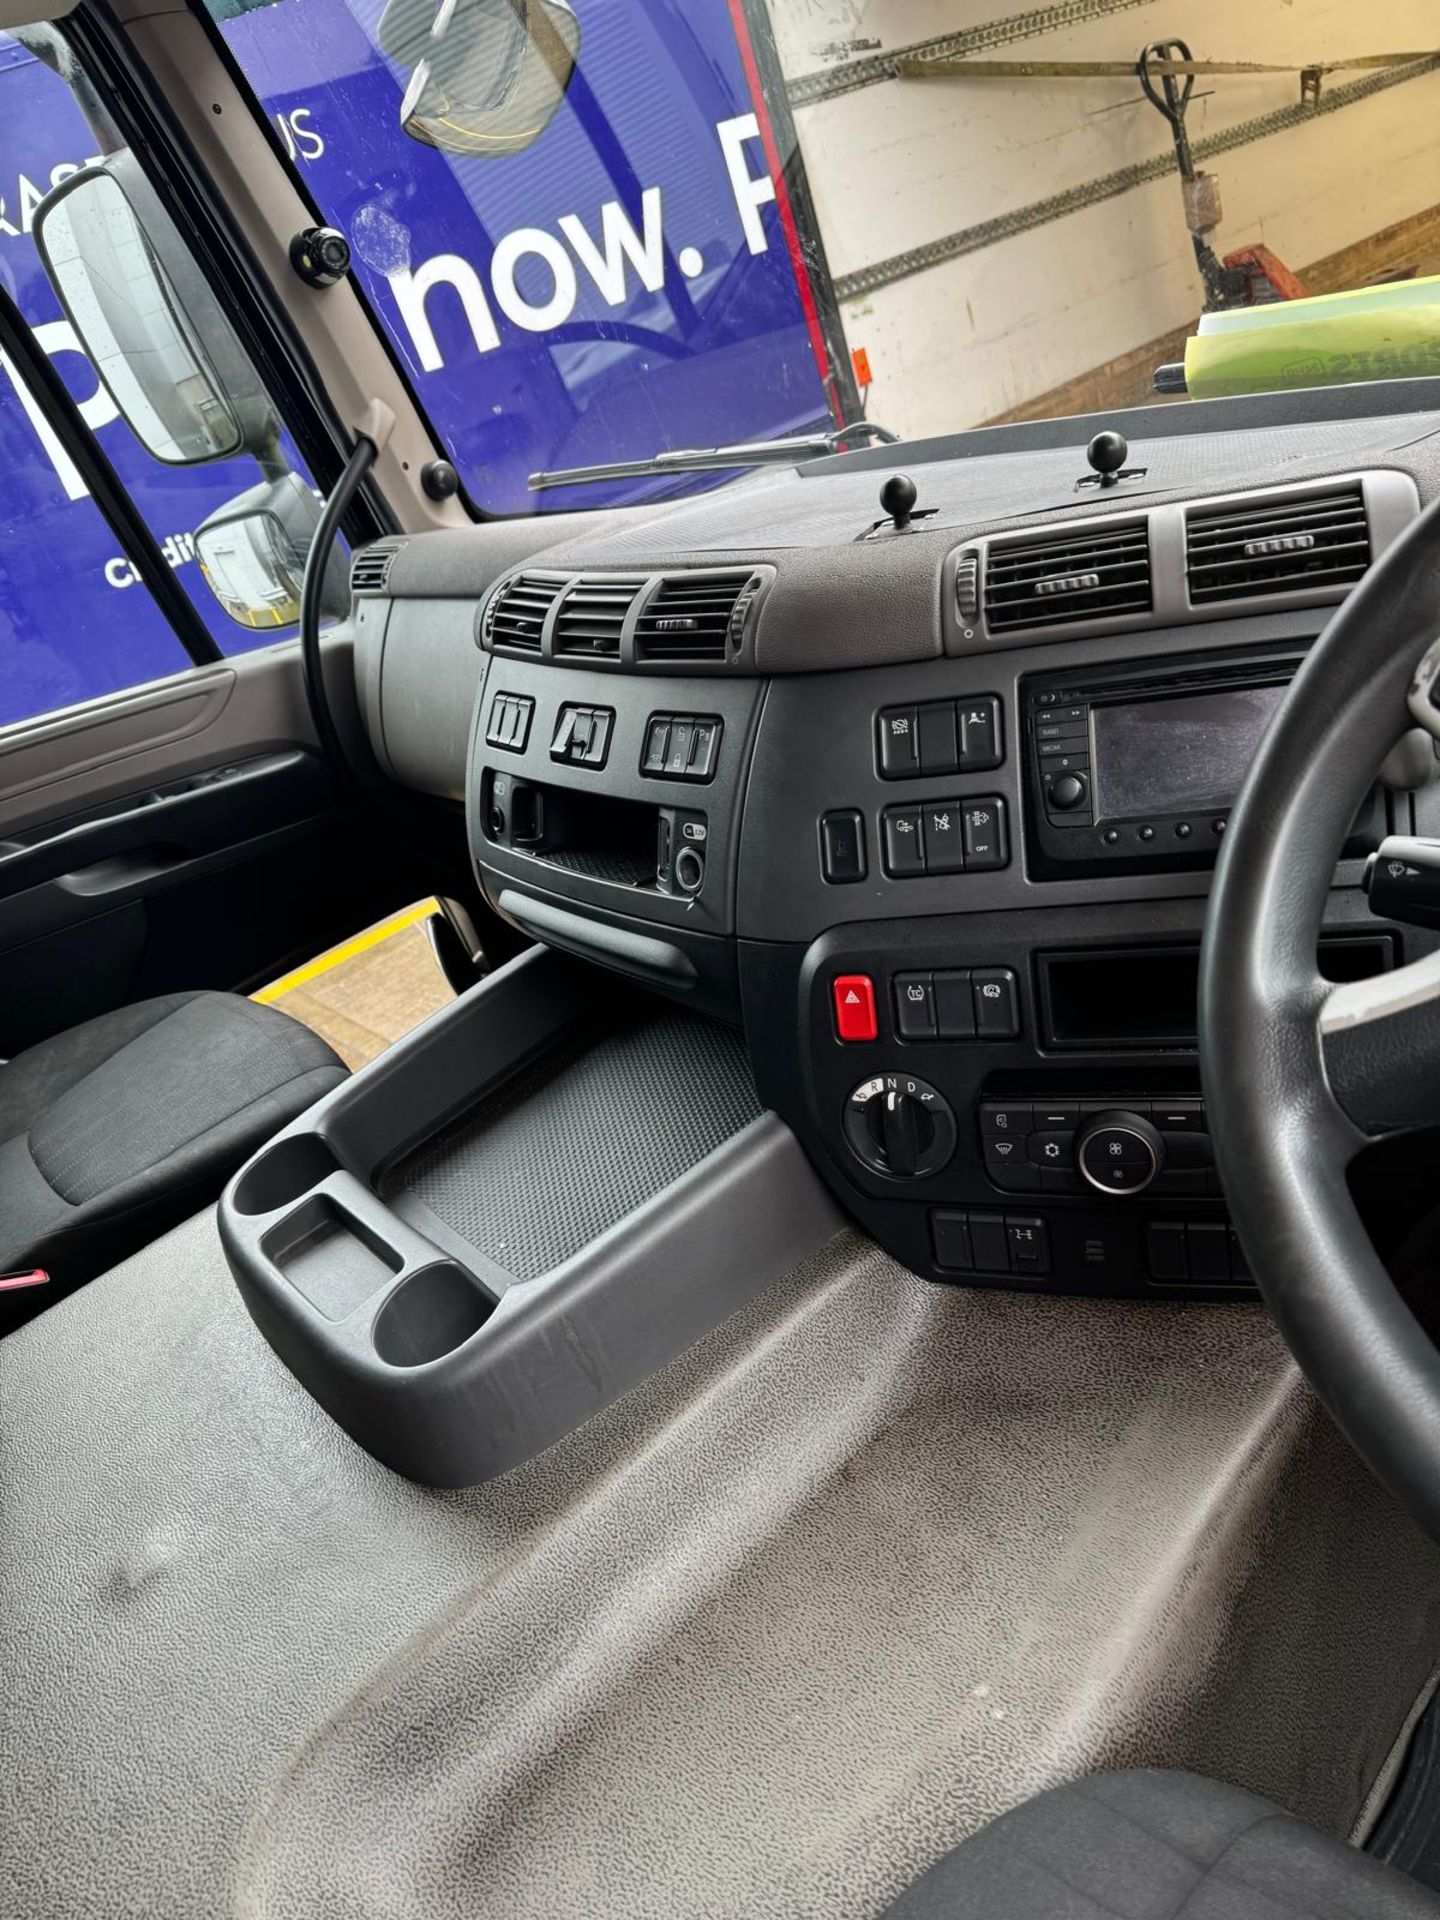 2019, DAF CF 260 FA (Ex-Fleet Owned & Maintained) - FN69 AXC (18 Ton Rigid Truck with Tail Lift) - Bild 8 aus 17